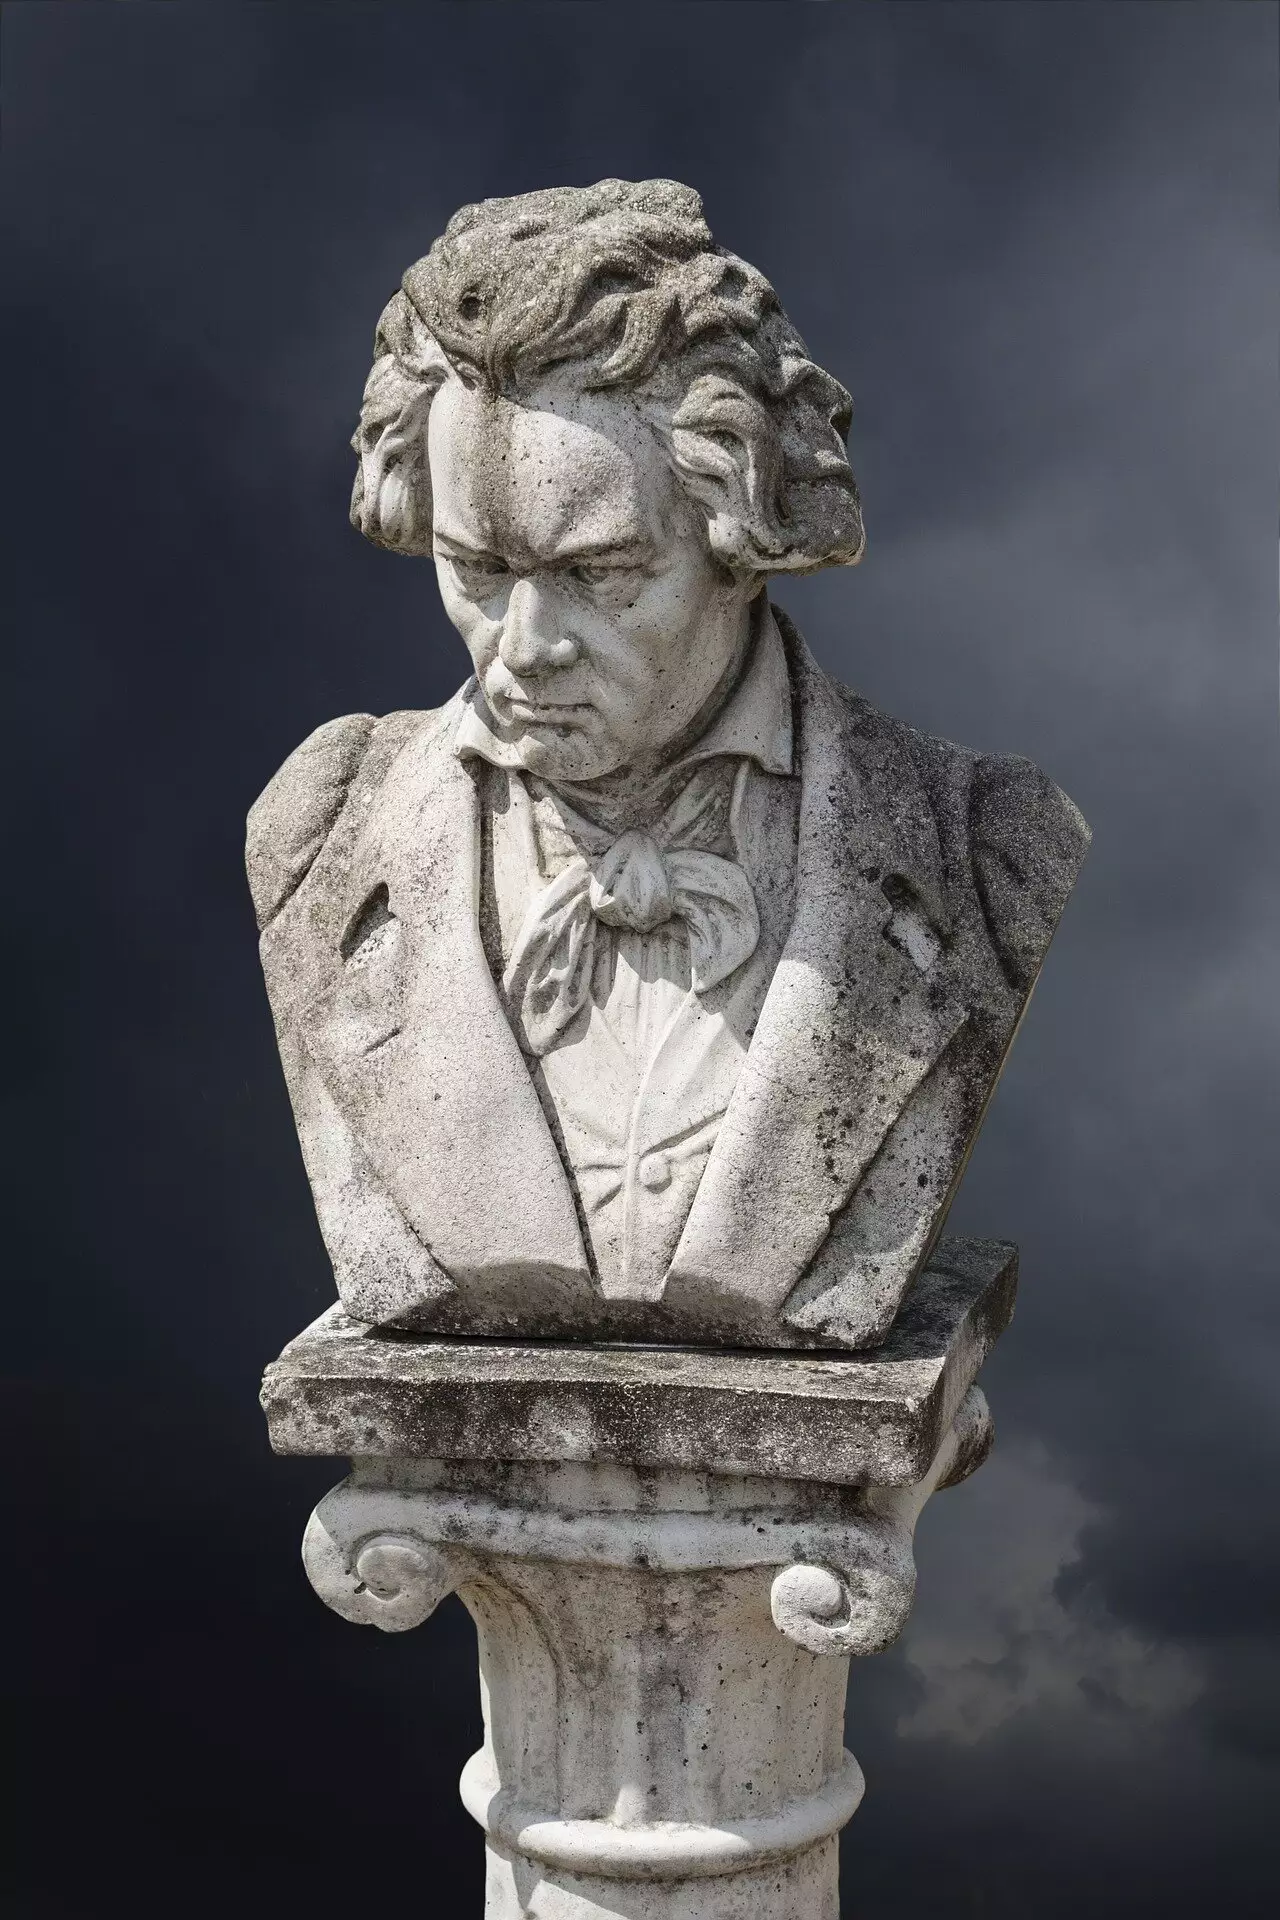 The Lead Poisoning Theory in Beethoven’s Death Debunked